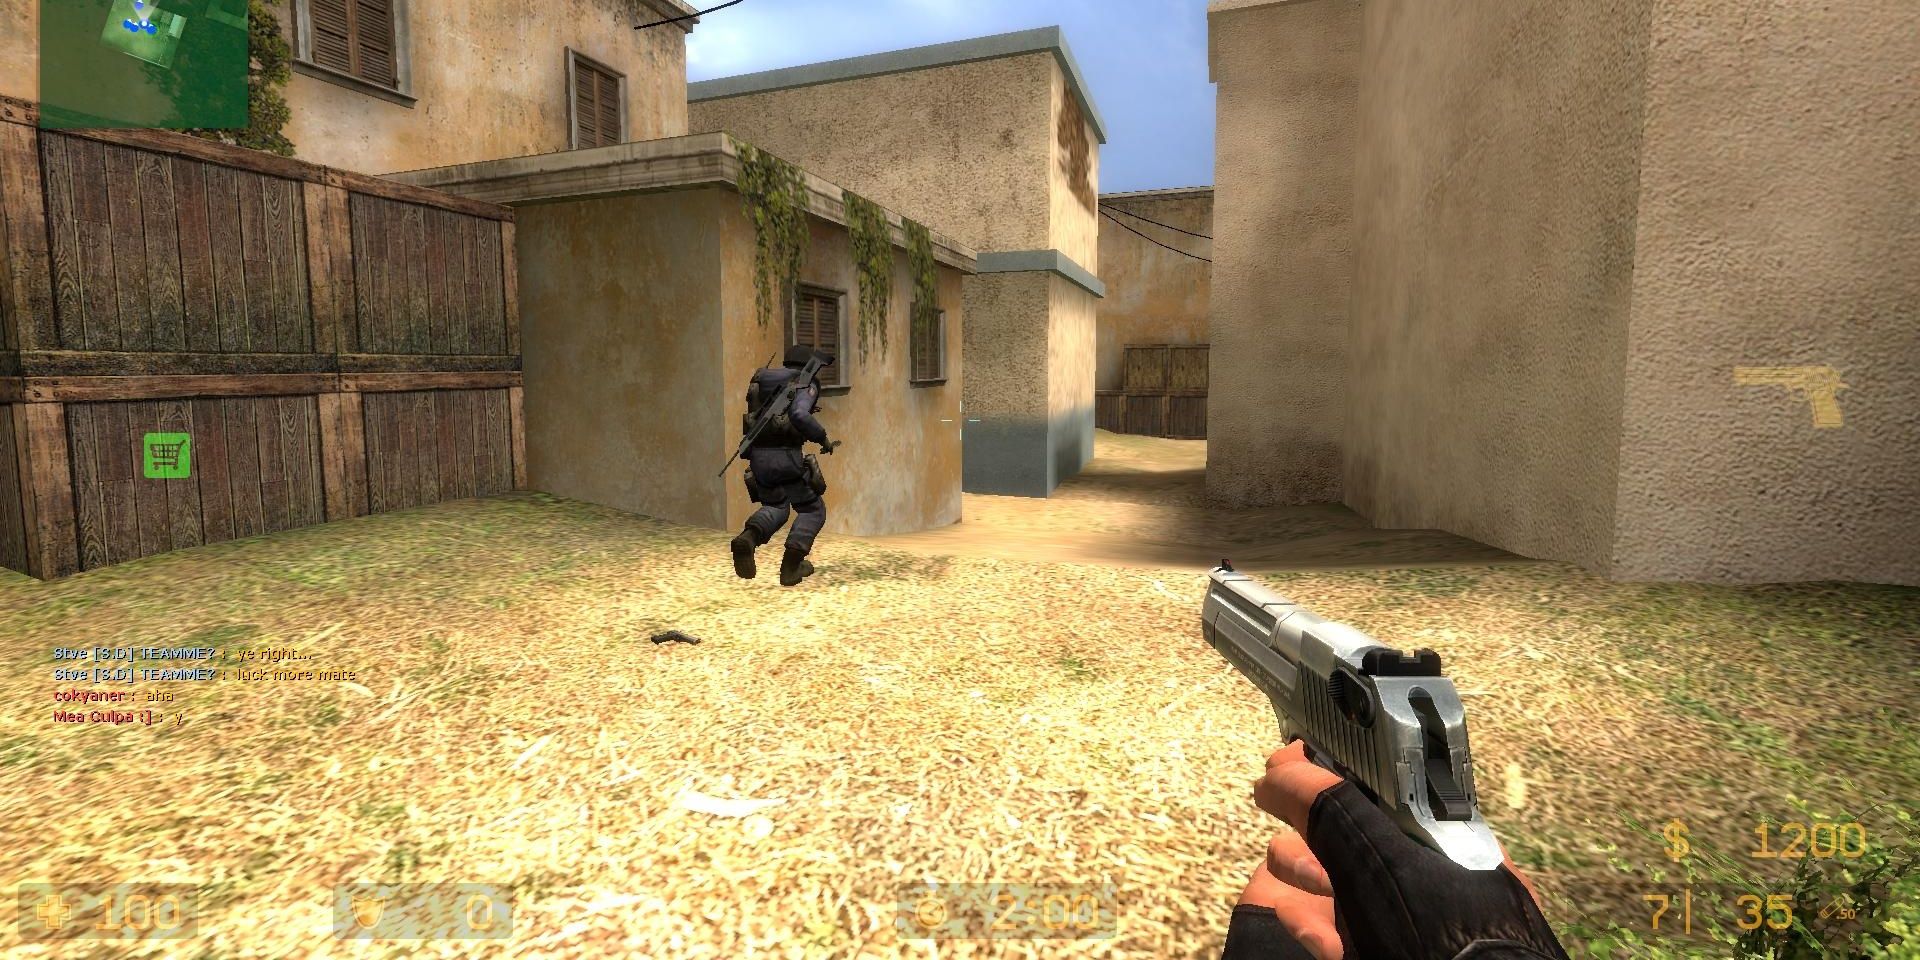 A screenshot showing gameplay in Counter-Strike: Source